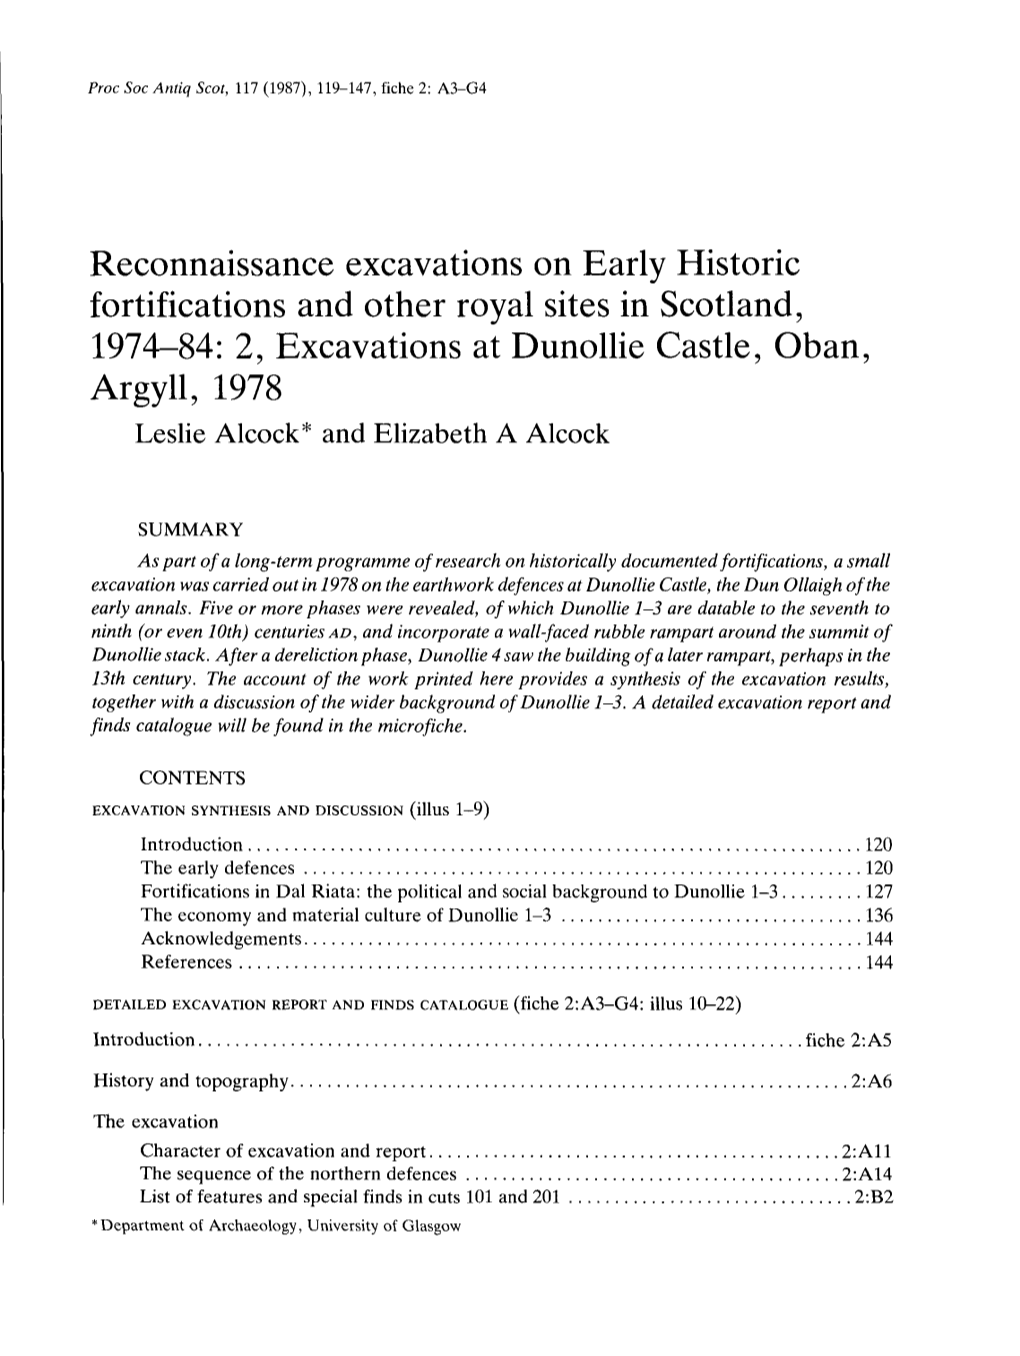 Reconnaissance Excavations on Early Historic Fortifications and Other